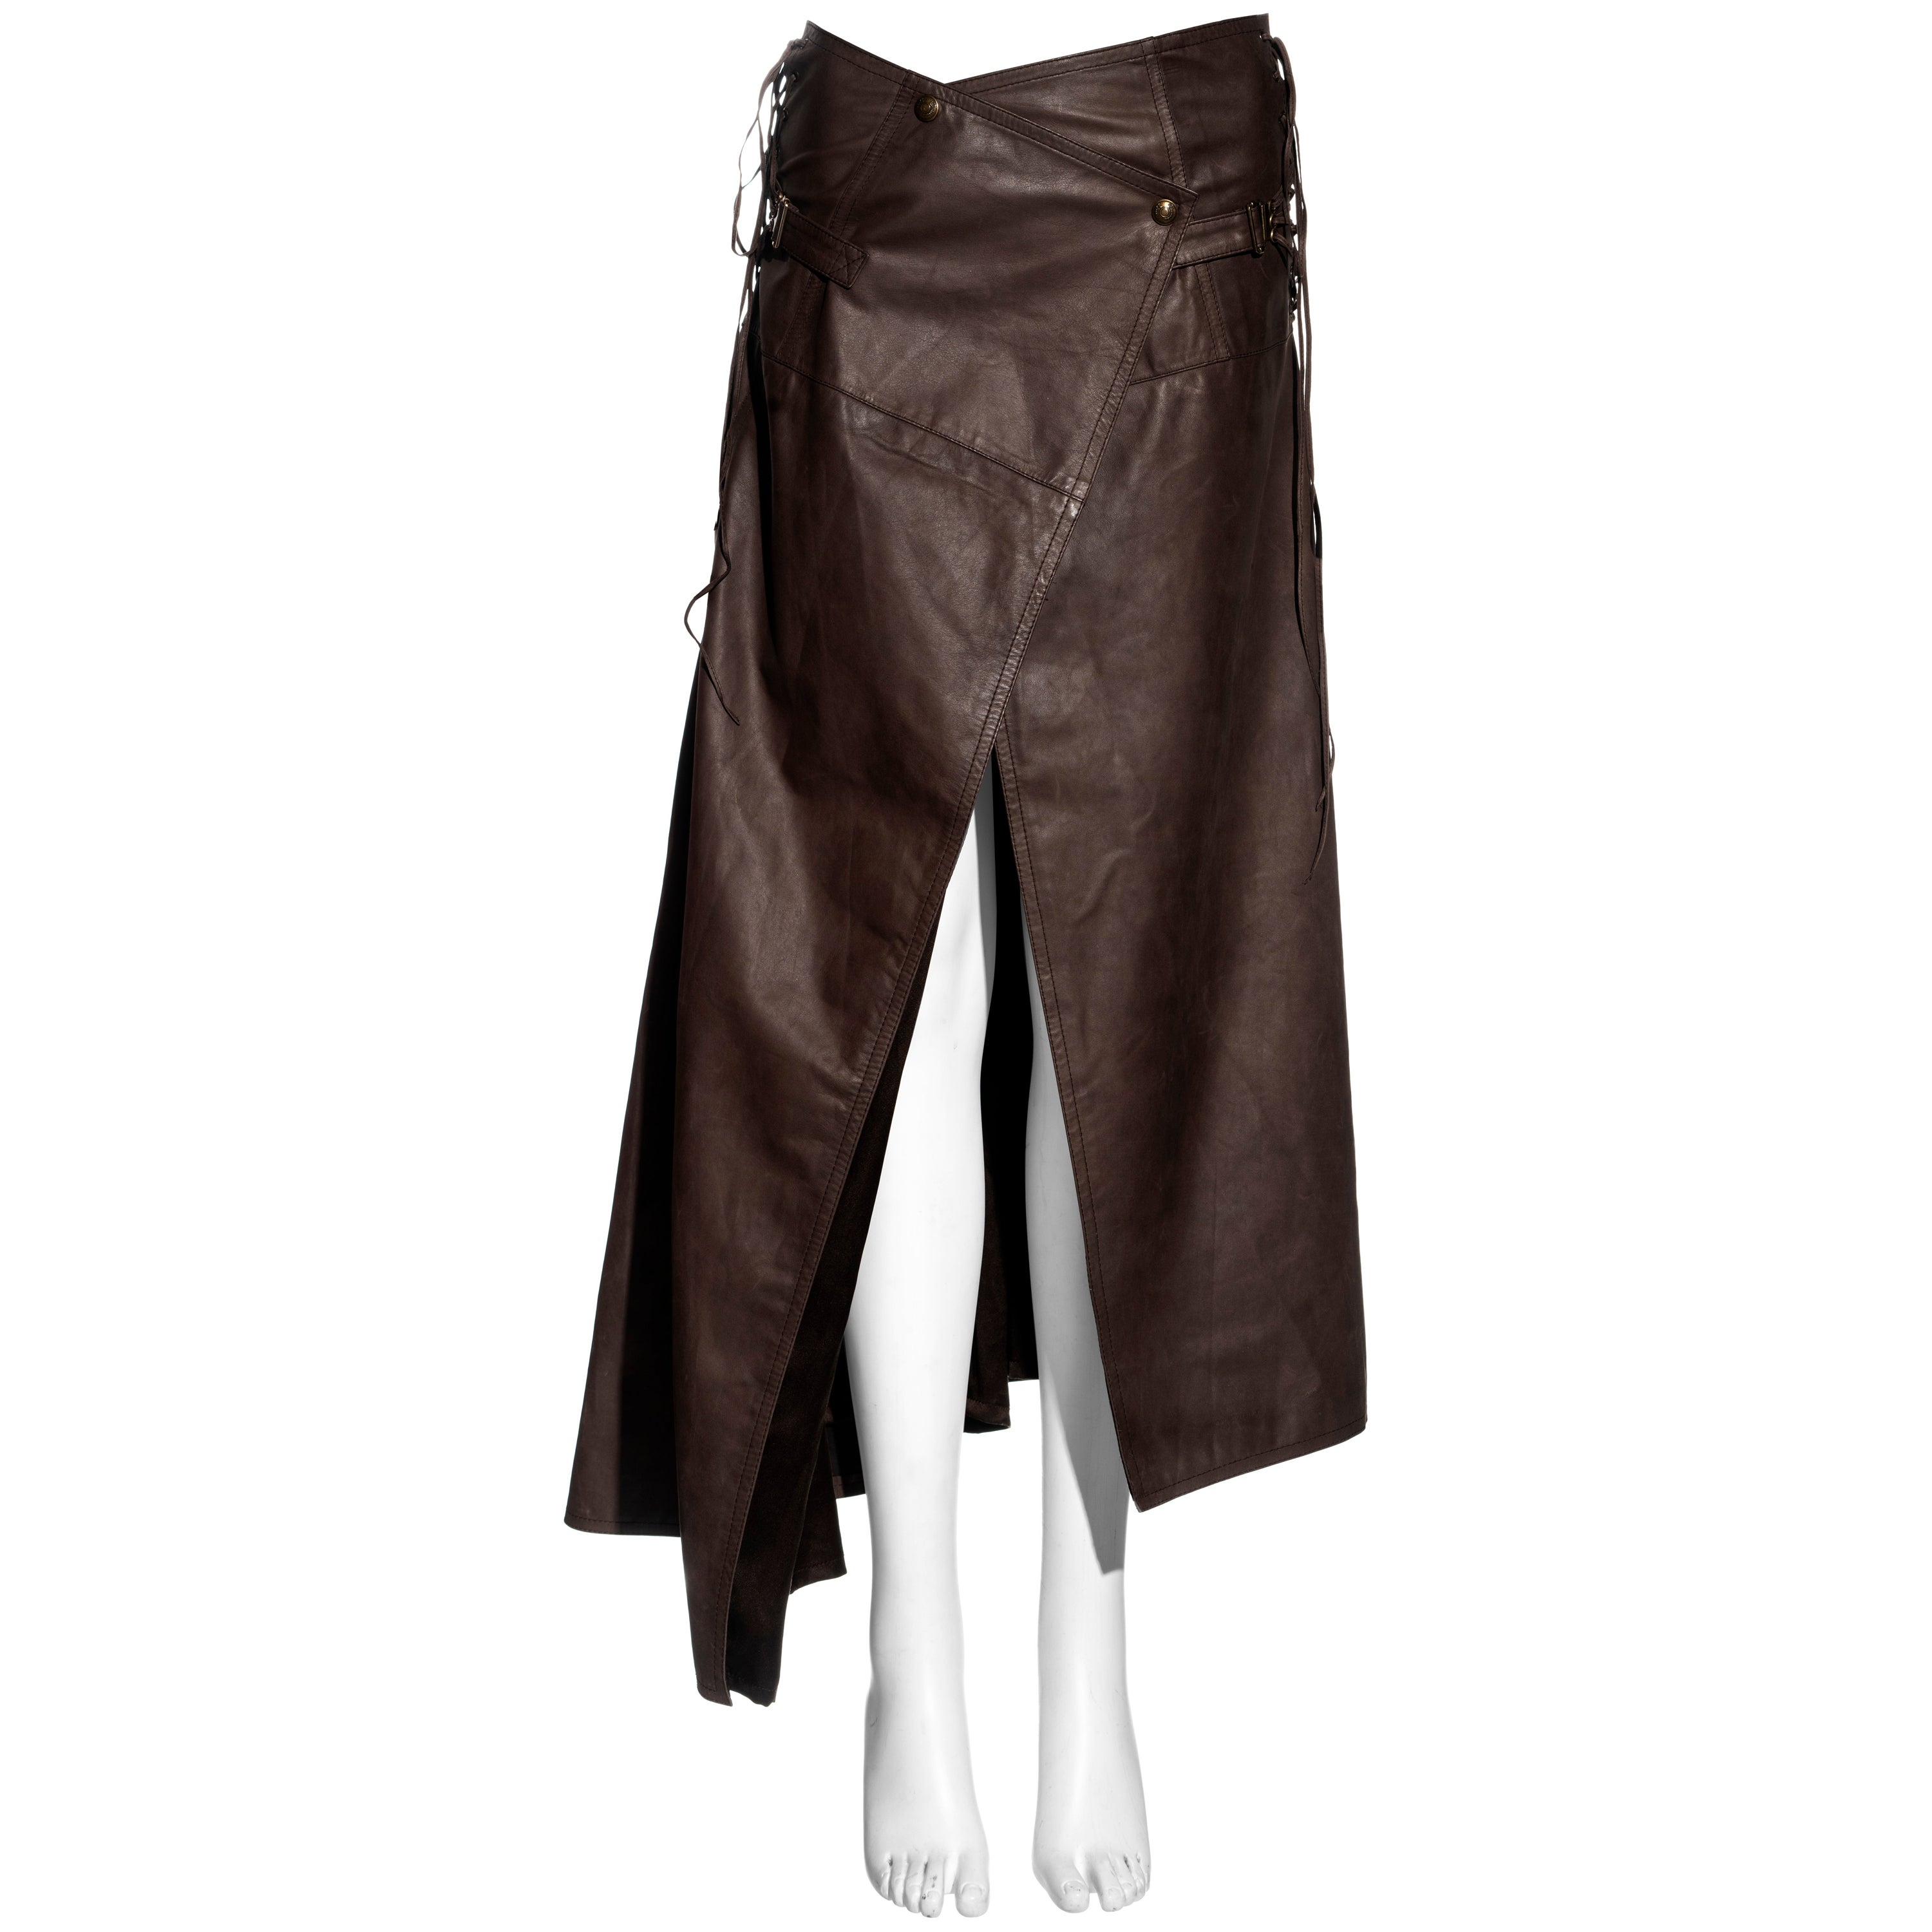 Christian Dior by John Galliano brown leather wrap skirt, ss 2001